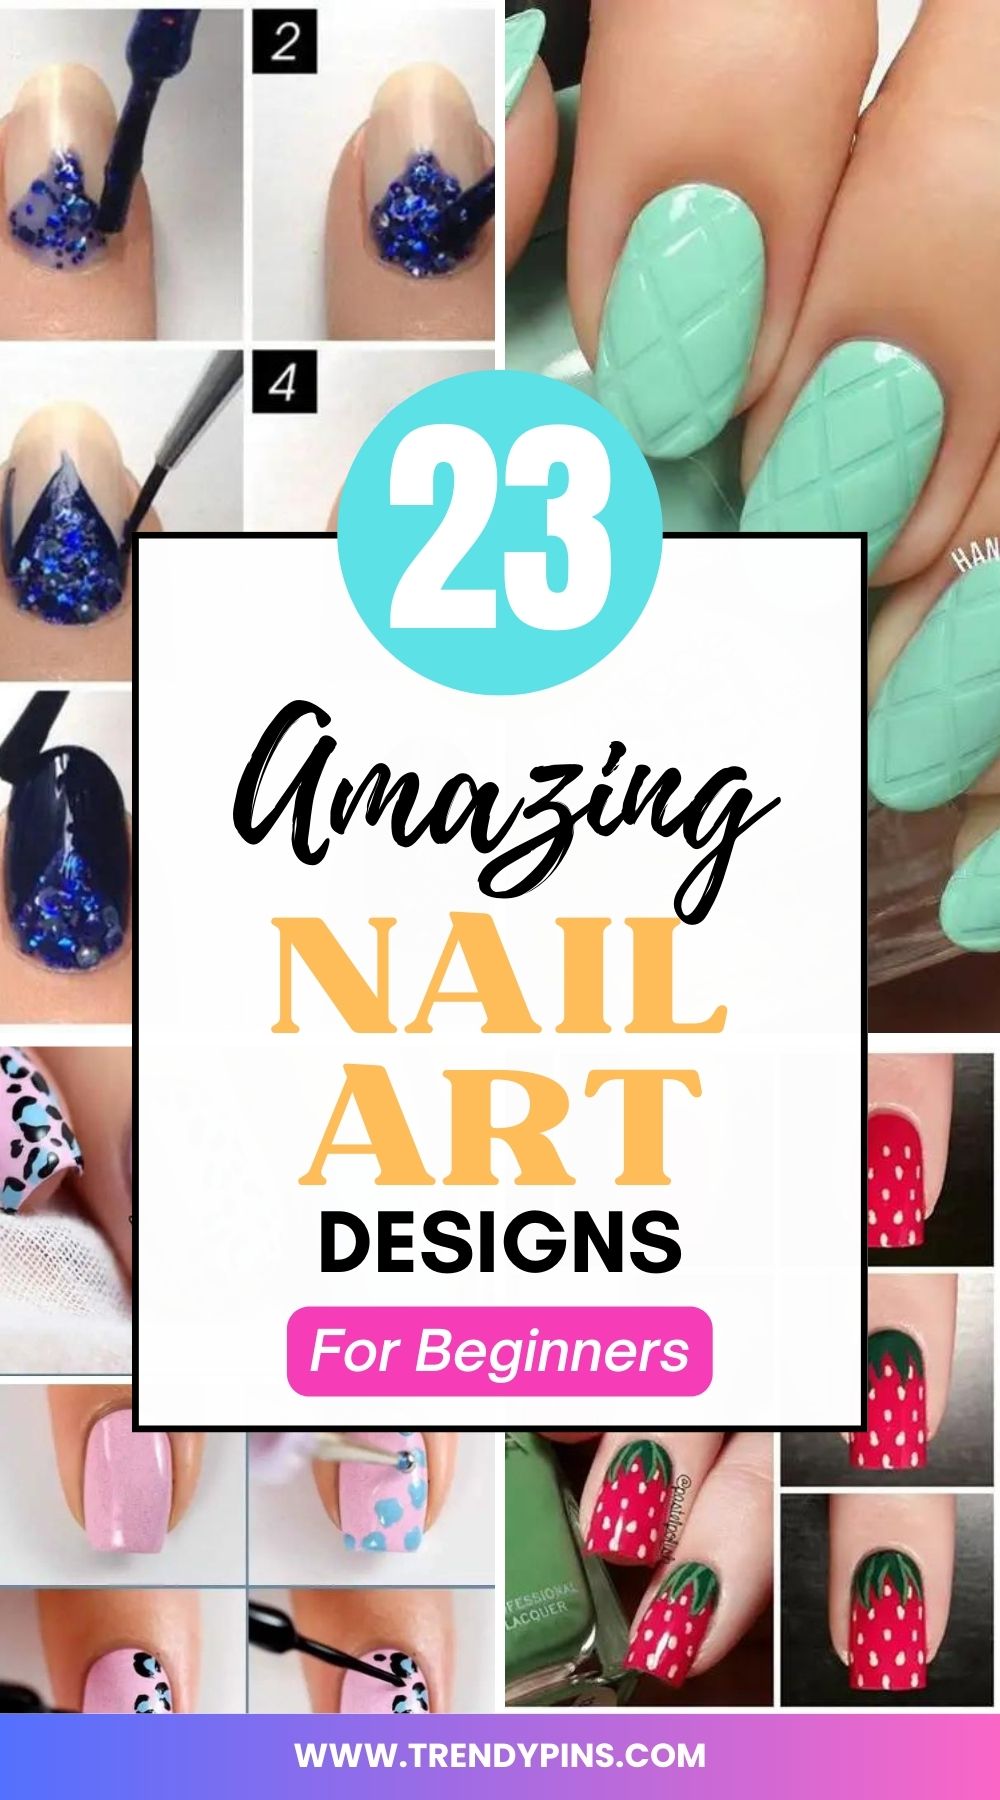 Dive into the world of nail art with these 23 amazing designs tailored for beginners. Explore step-by-step tutorials and unleash your creativity to achieve stunning nail art looks effortlessly.